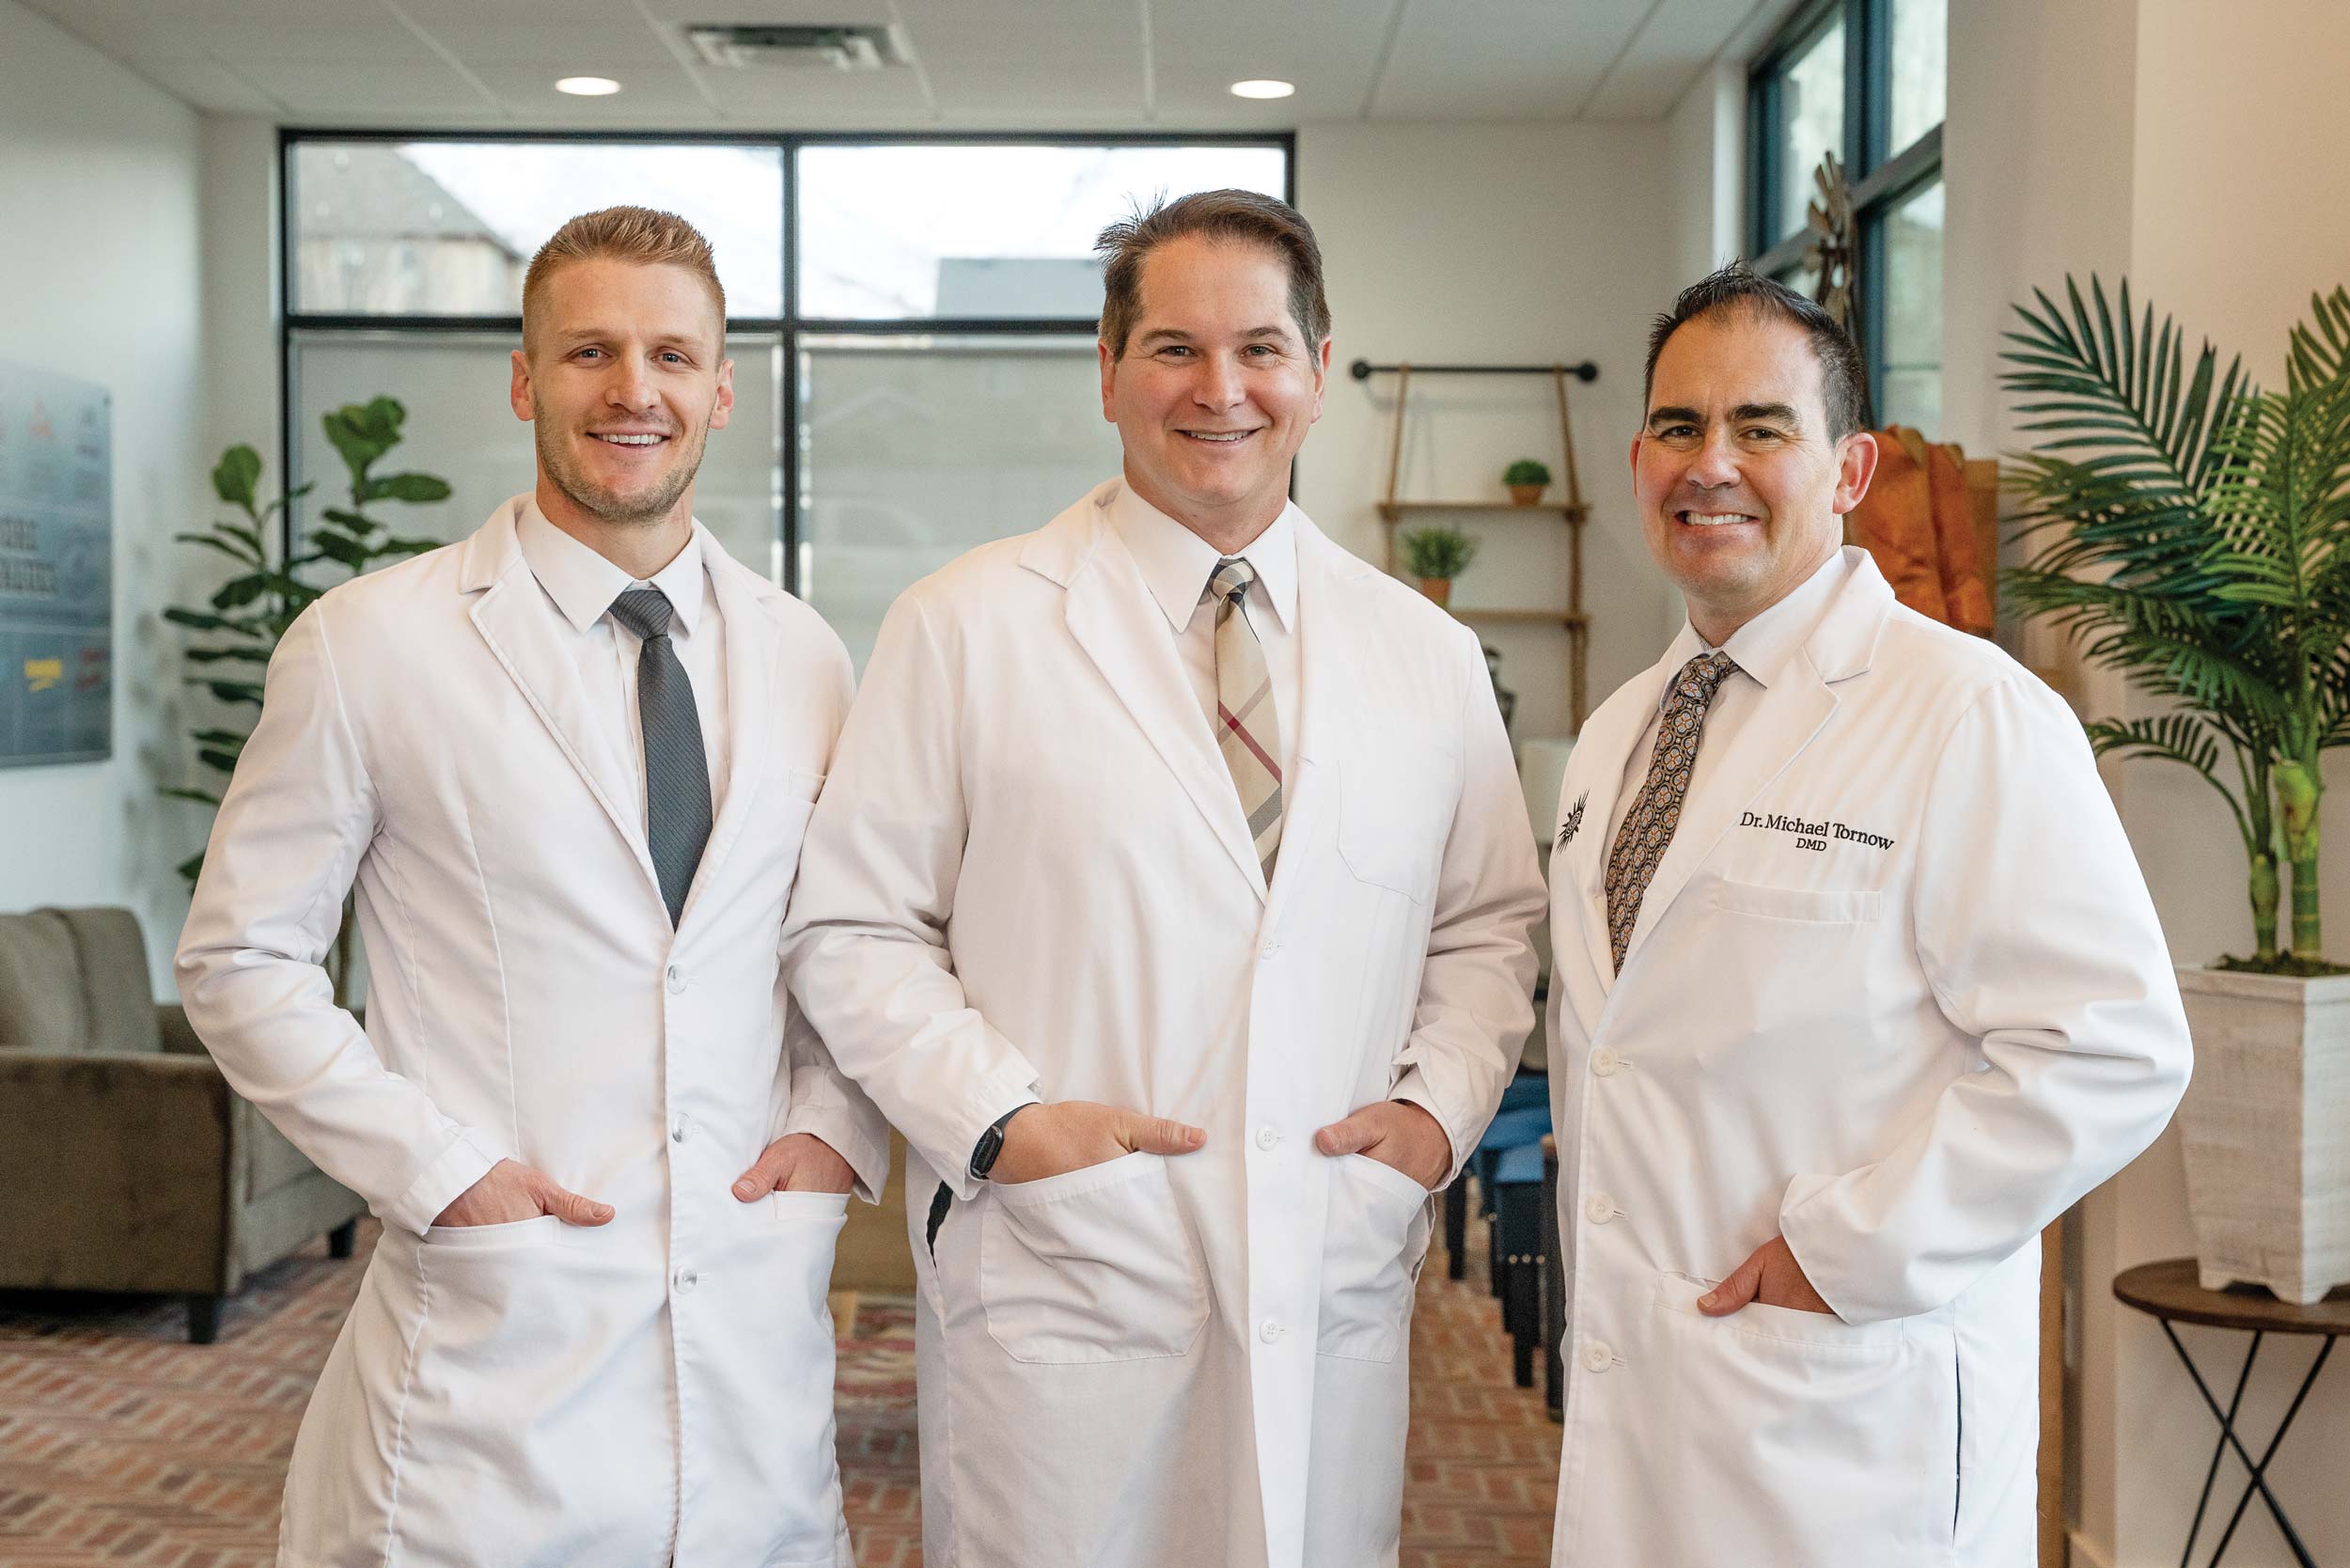 Meet the managing partners: Dr. Dallin DeLoach, Dr. Tom Chamberlain, and Dr. Michael Tornow. The smiling doctors are wearing white lab coats. They are standing side-by-side smiling pleasantly at the camera.